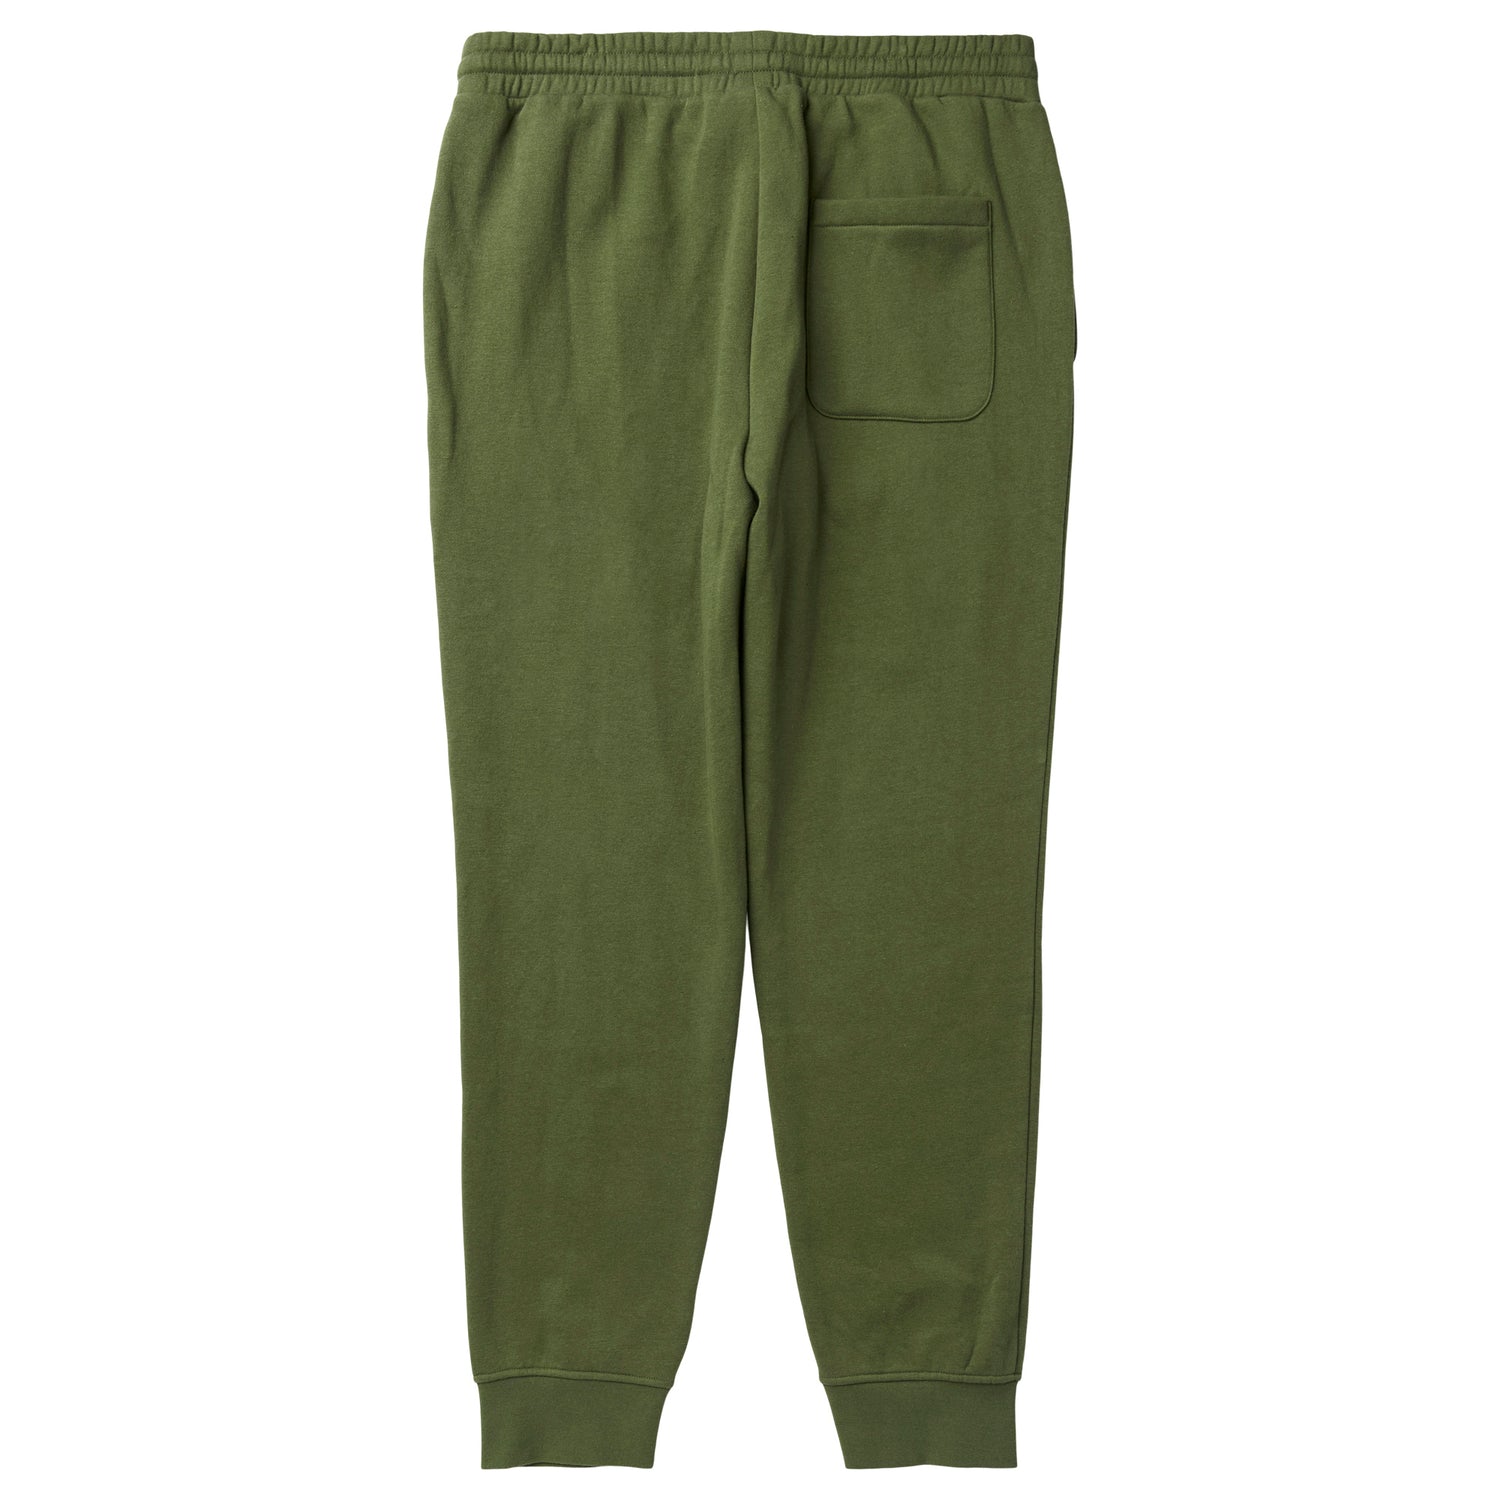 DEEP IN THE FEEDING JOGGER SWEATPANTS - LEAF CLOVER